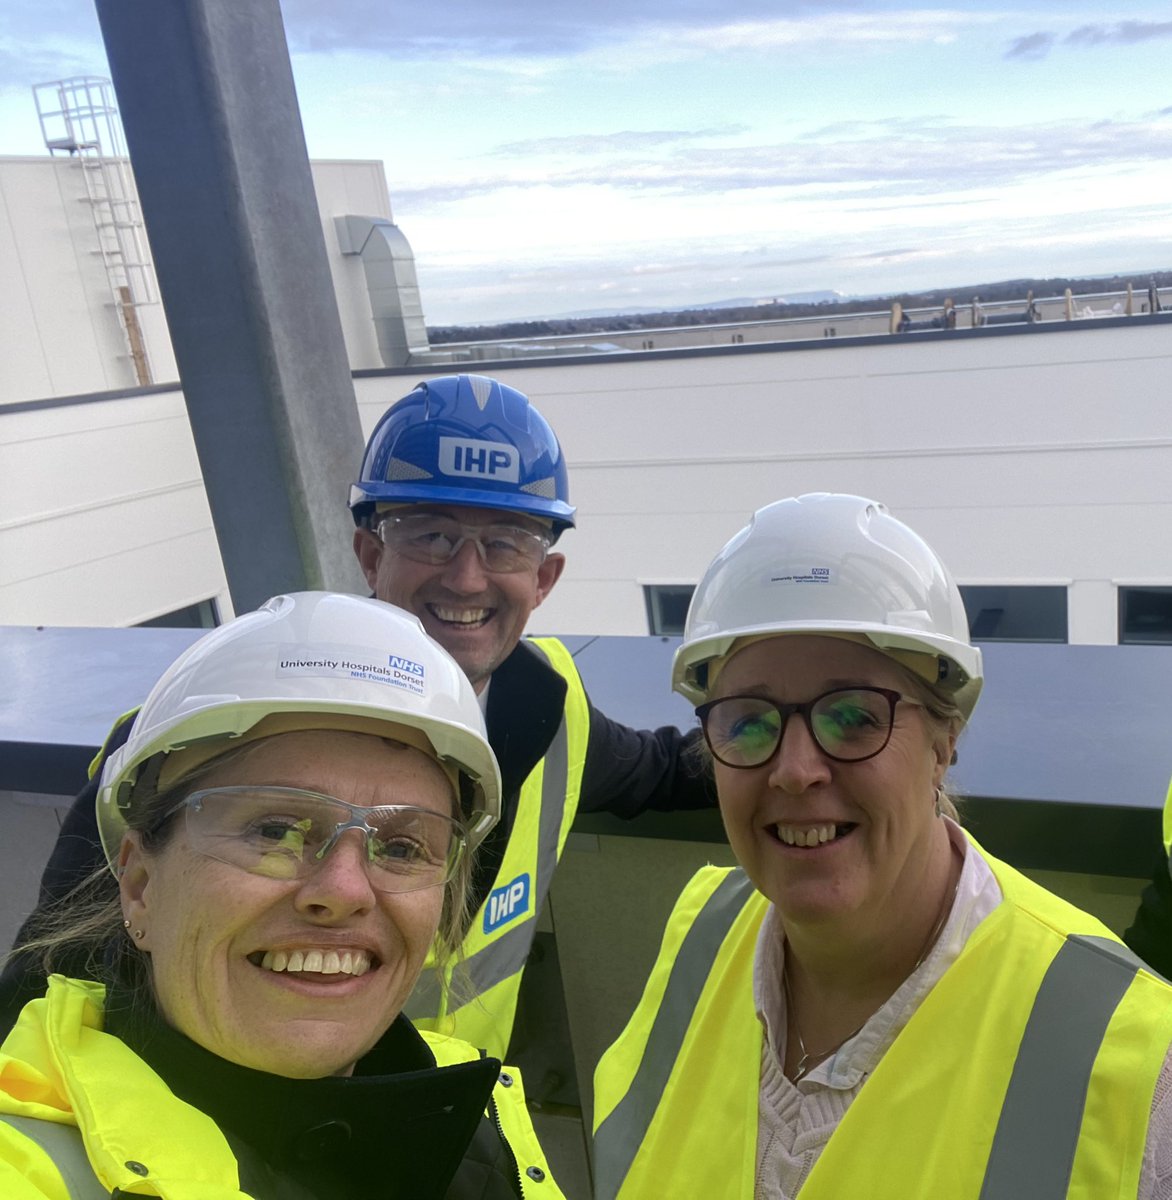 Great to host @hcashells on a visit to @UHD_NHS taking in the new CPK, Pt lunch on W4 with @chickeec and views from the roof of our new BEACH building with Ali P #TeamUHD 💙Amazing work by @UhdCatering so proud of you all💙